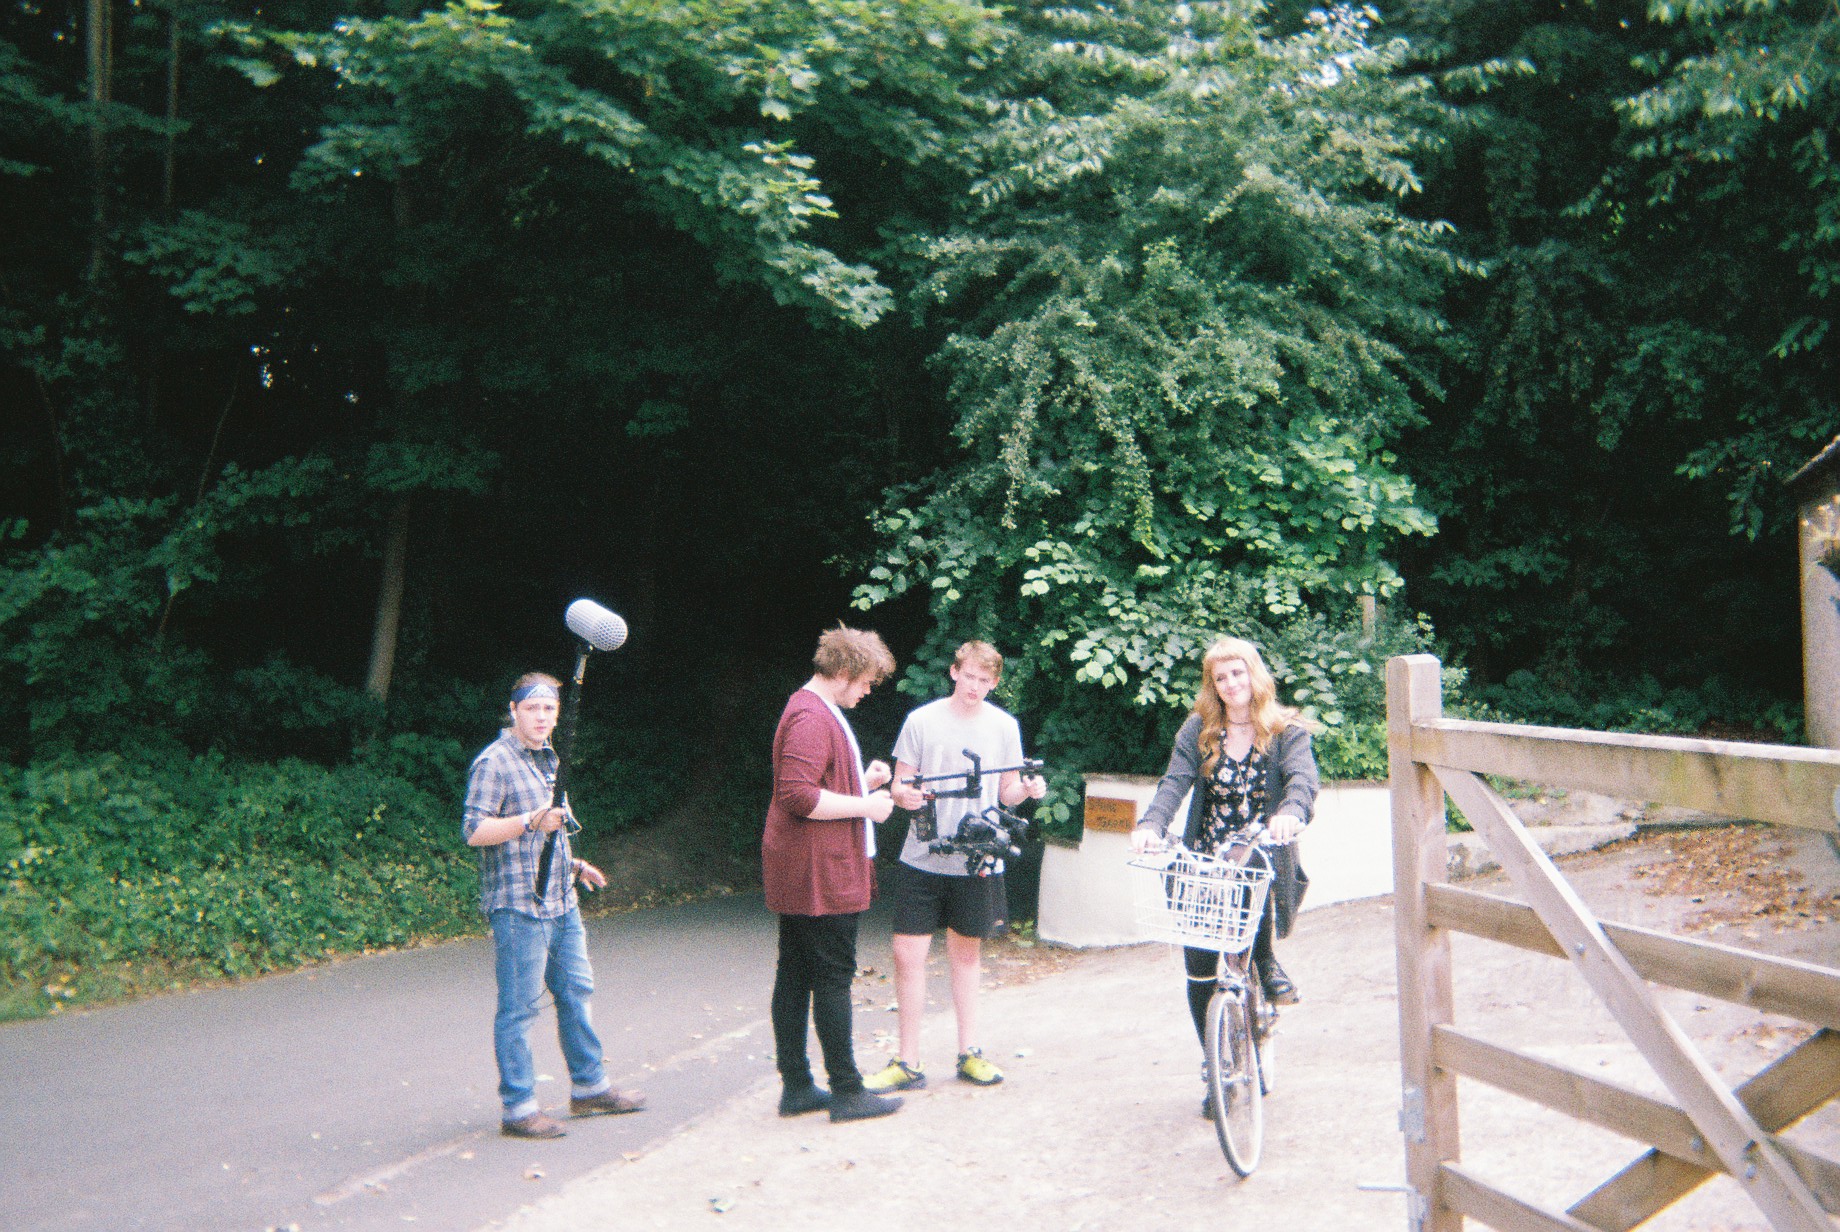 On set of Beneath the Shadows (L-R) Jamie Bancroft, Gage Oxley, James Hodge and Anna Keat